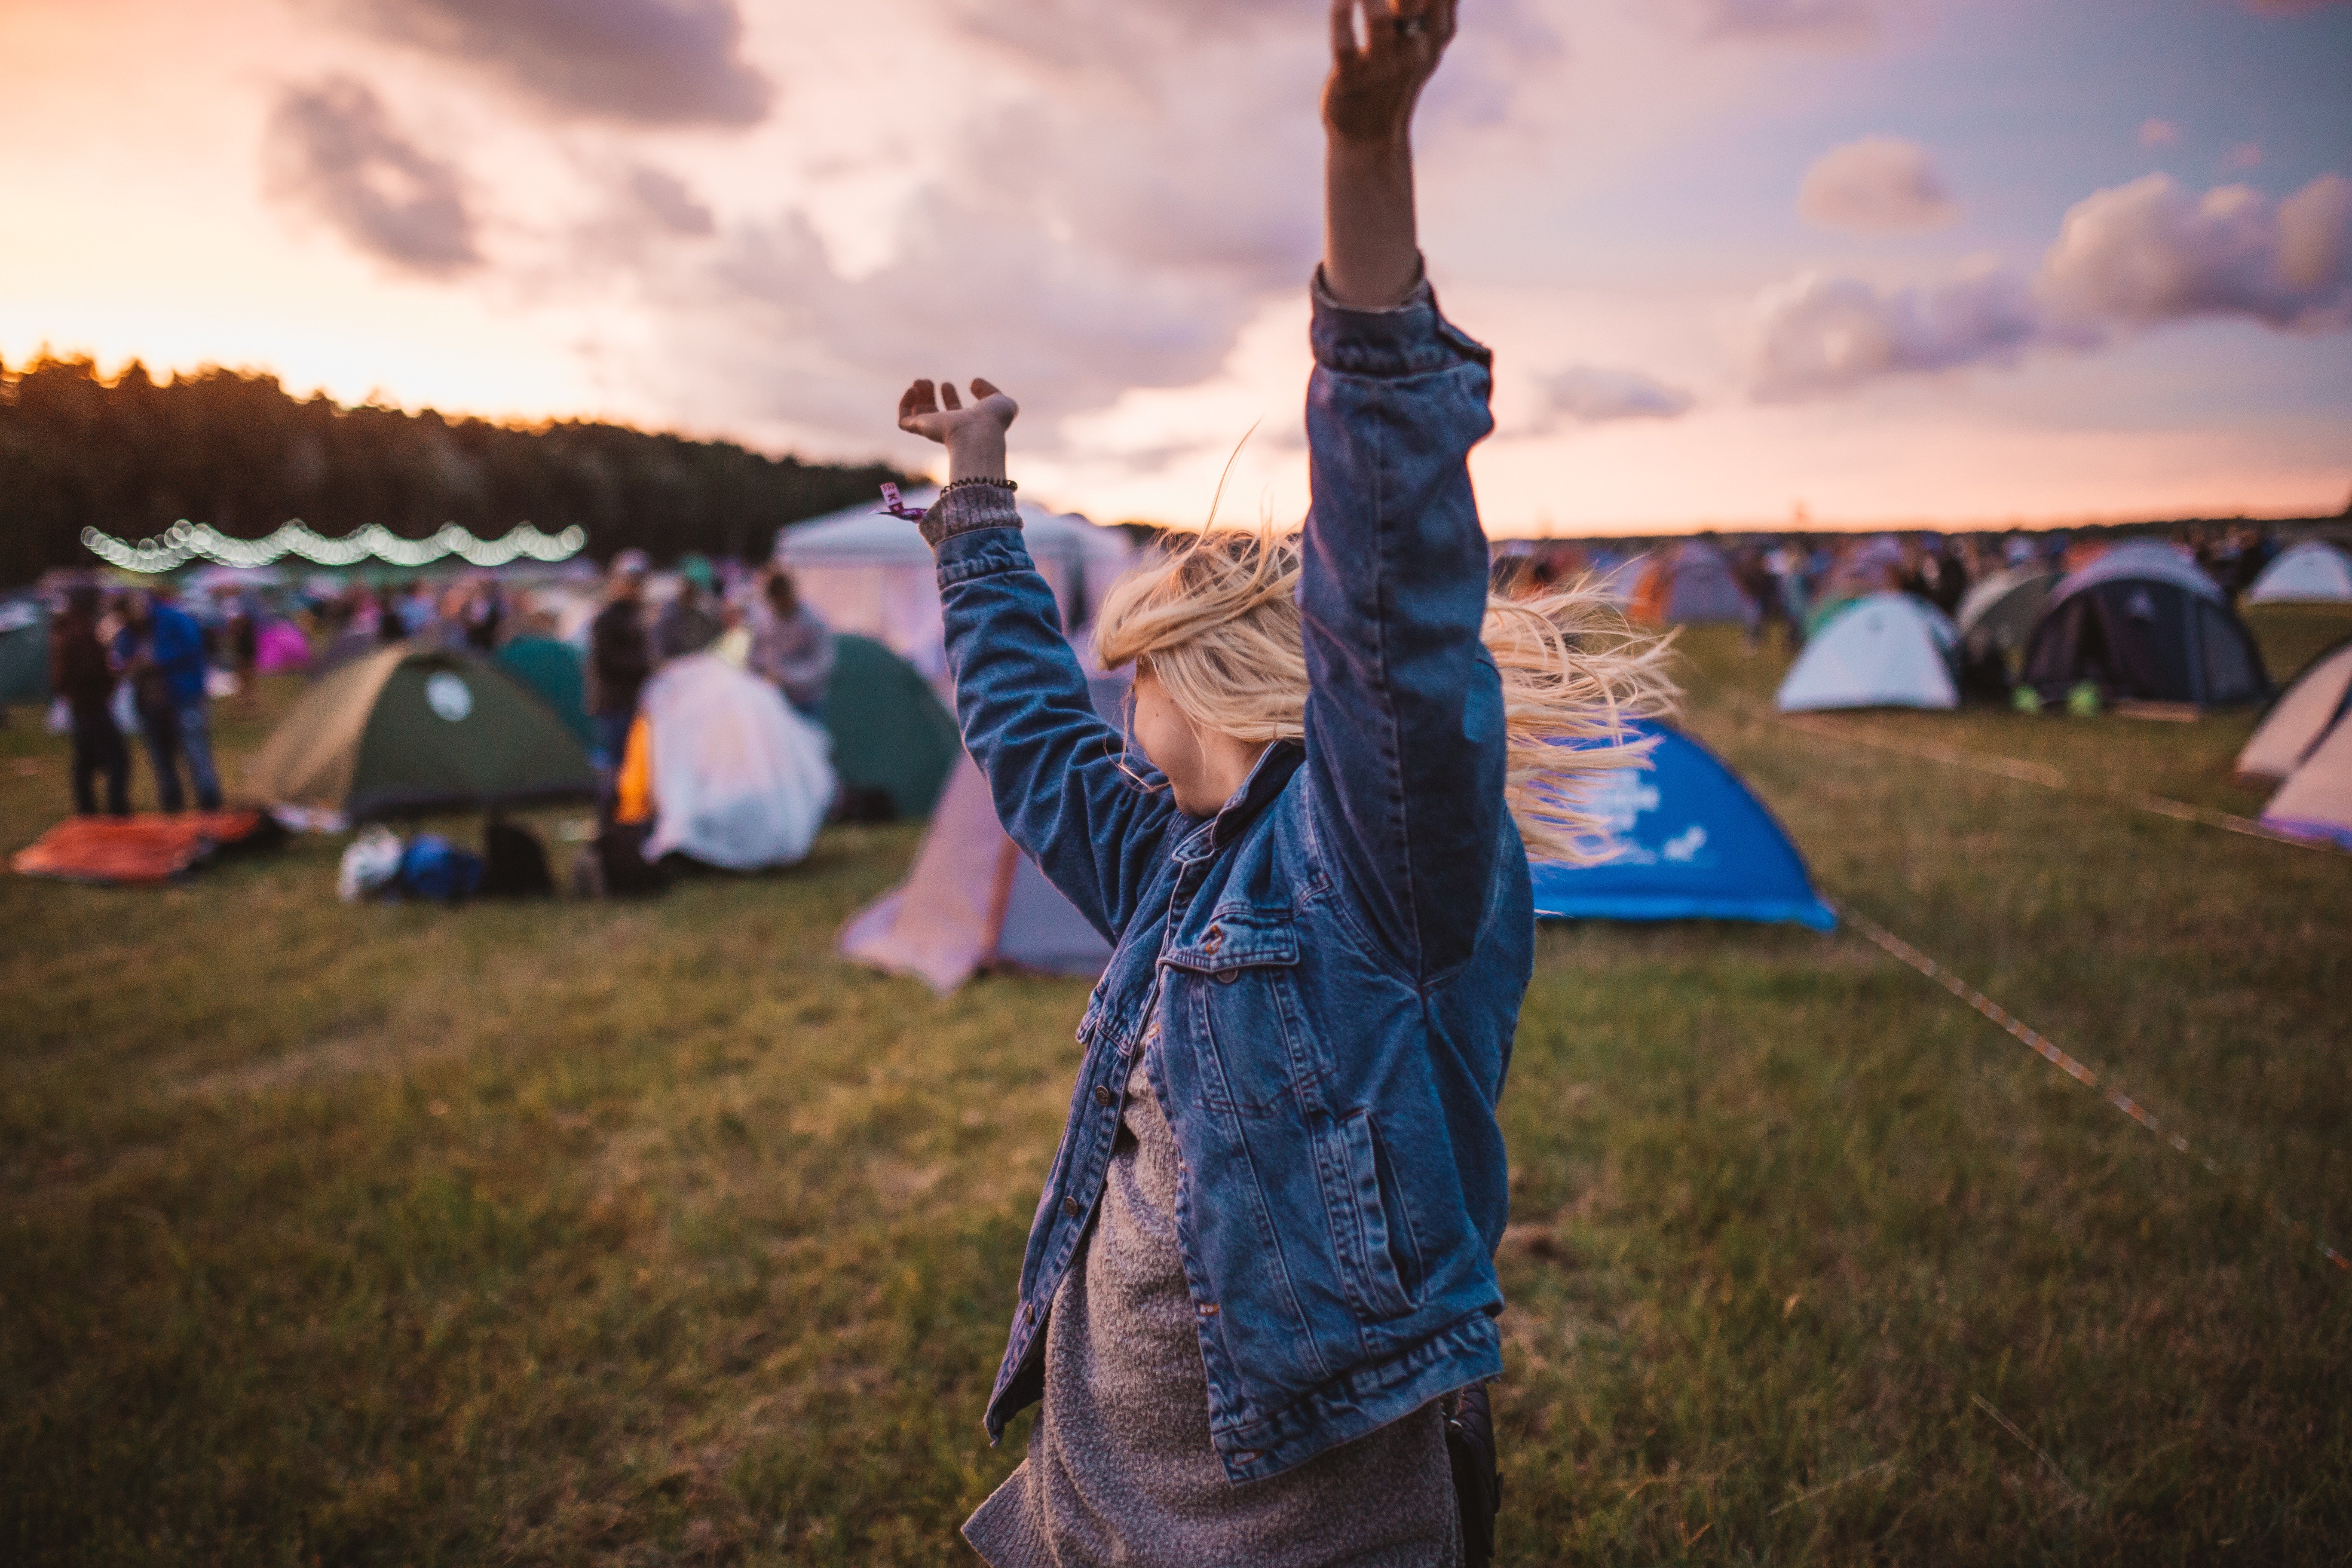 5 Music Festivals Where You Can Camp and Jam This Summer and Fall